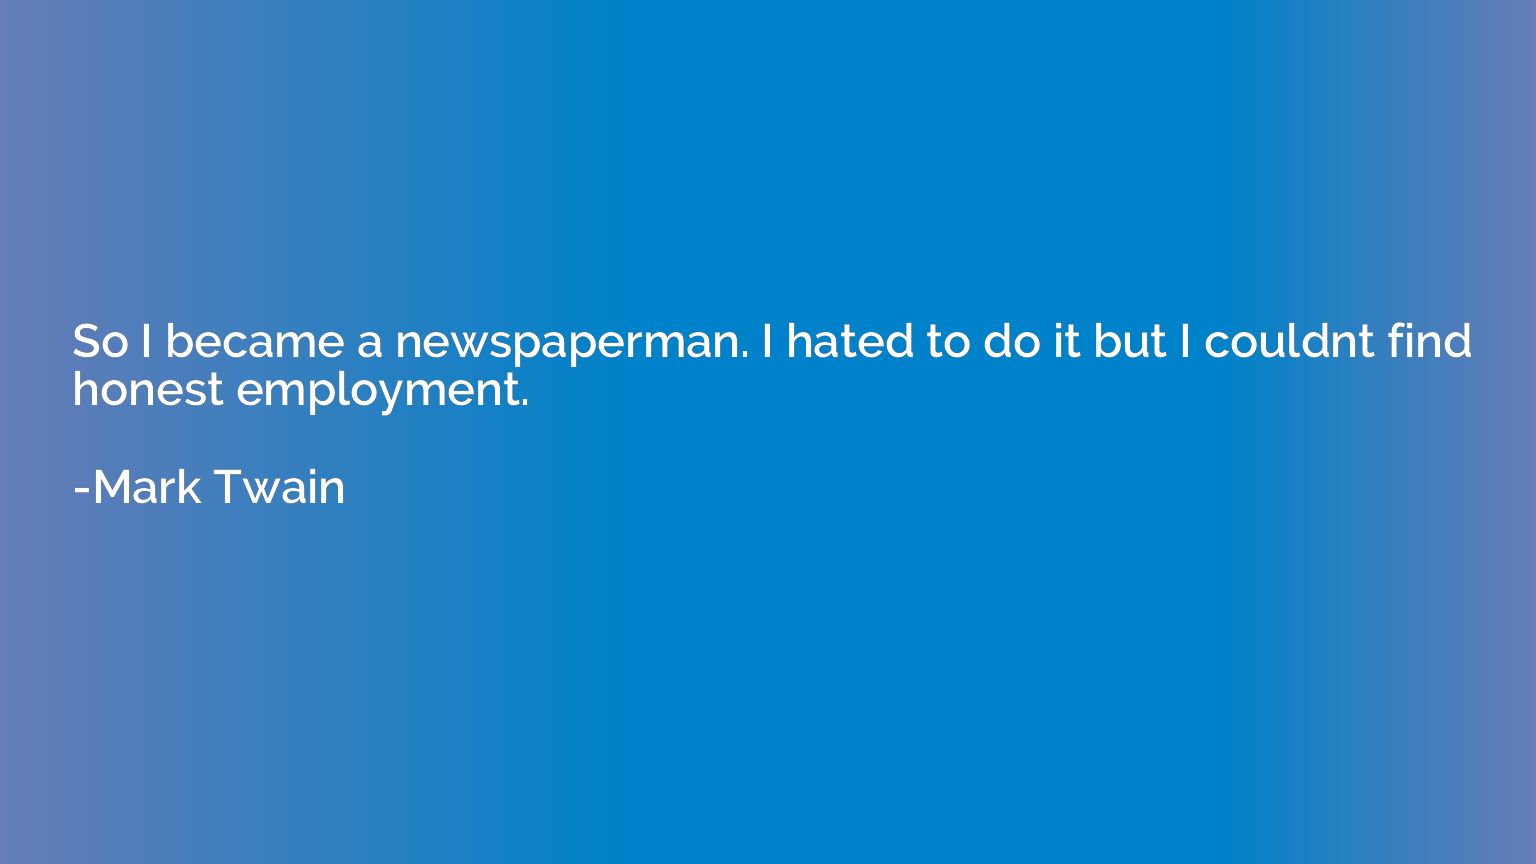 So I became a newspaperman. I hated to do it but I couldnt f